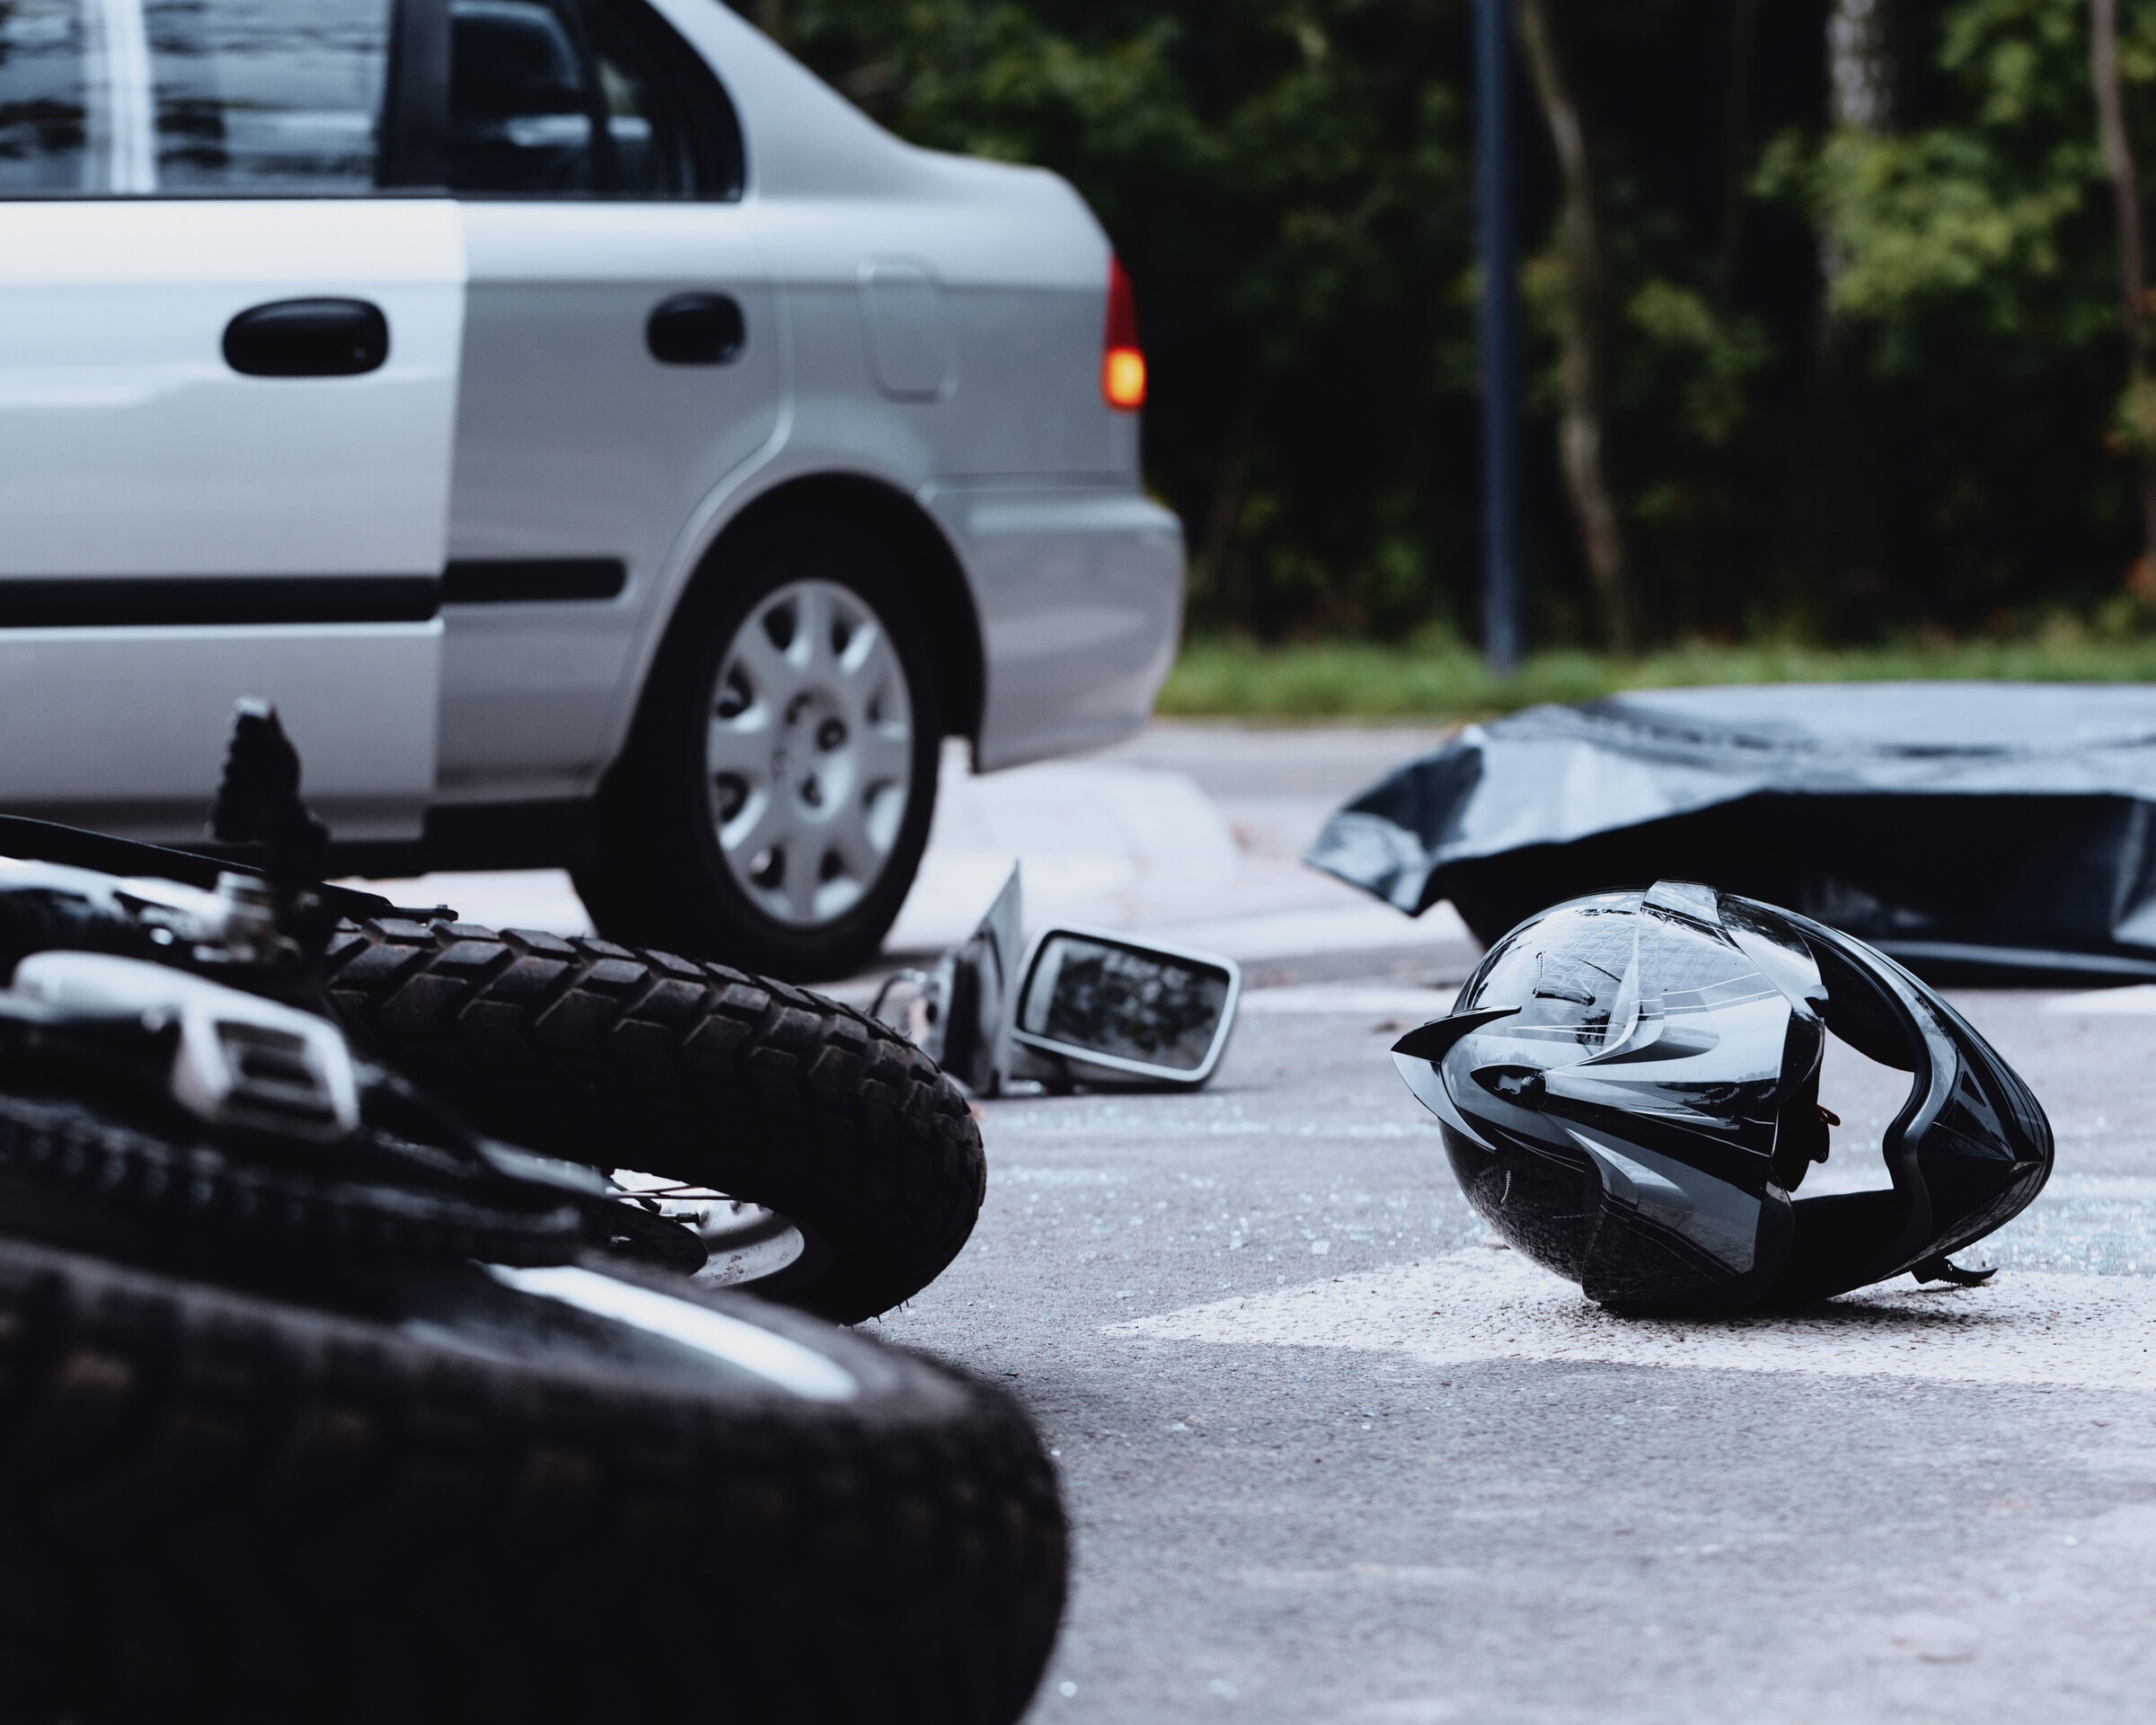 Reliable lawyers who are dedicated to providing support and guidance to those affected by car and motor vehicle accidents in Anaheim